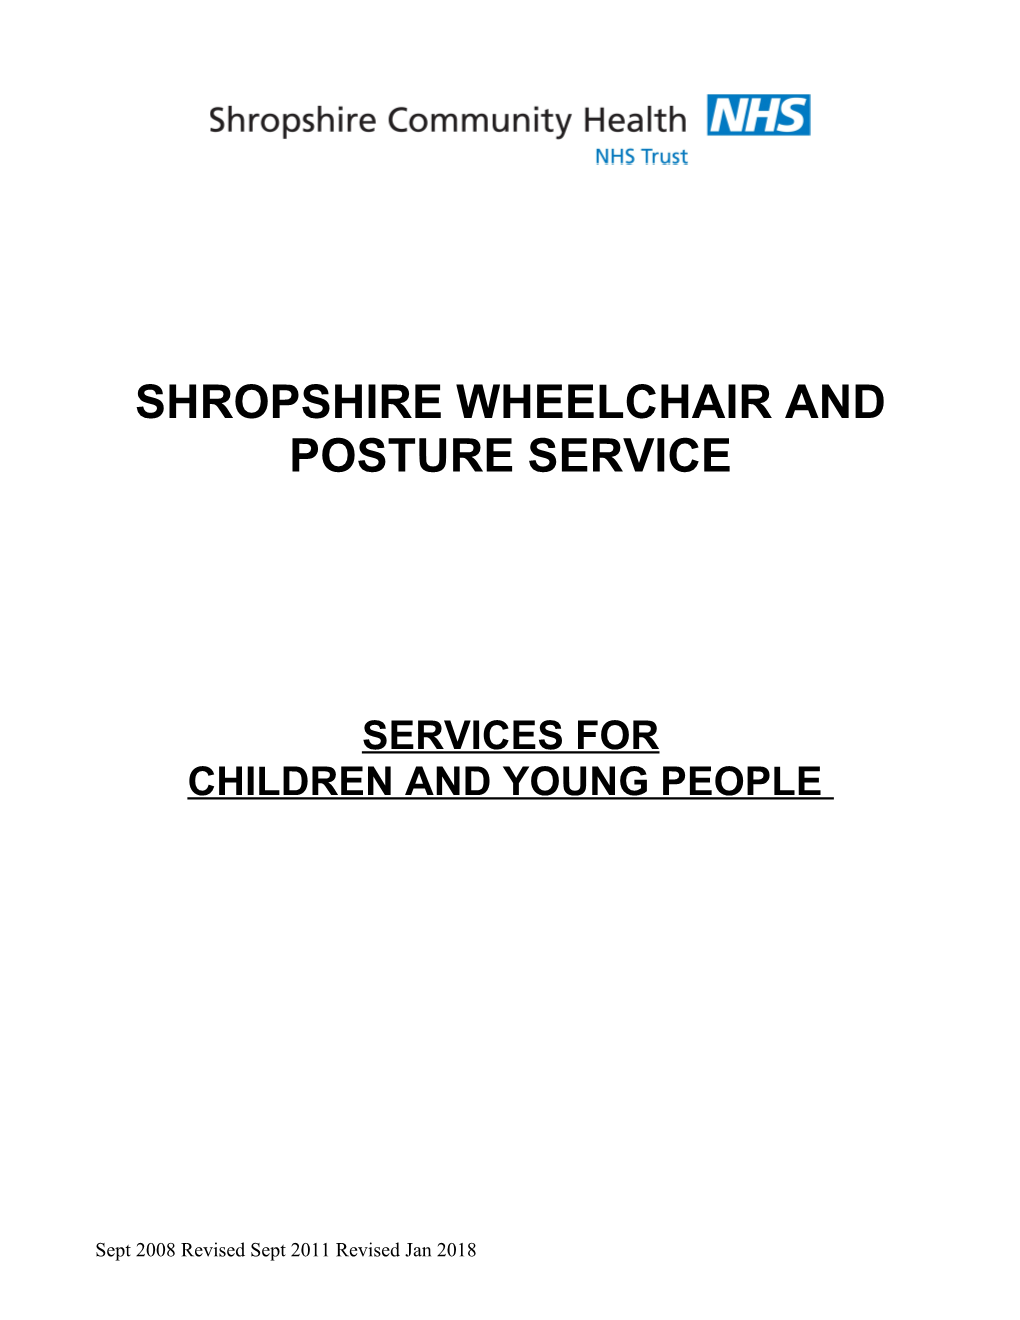 Shropshire Wheelchair and Posture Service